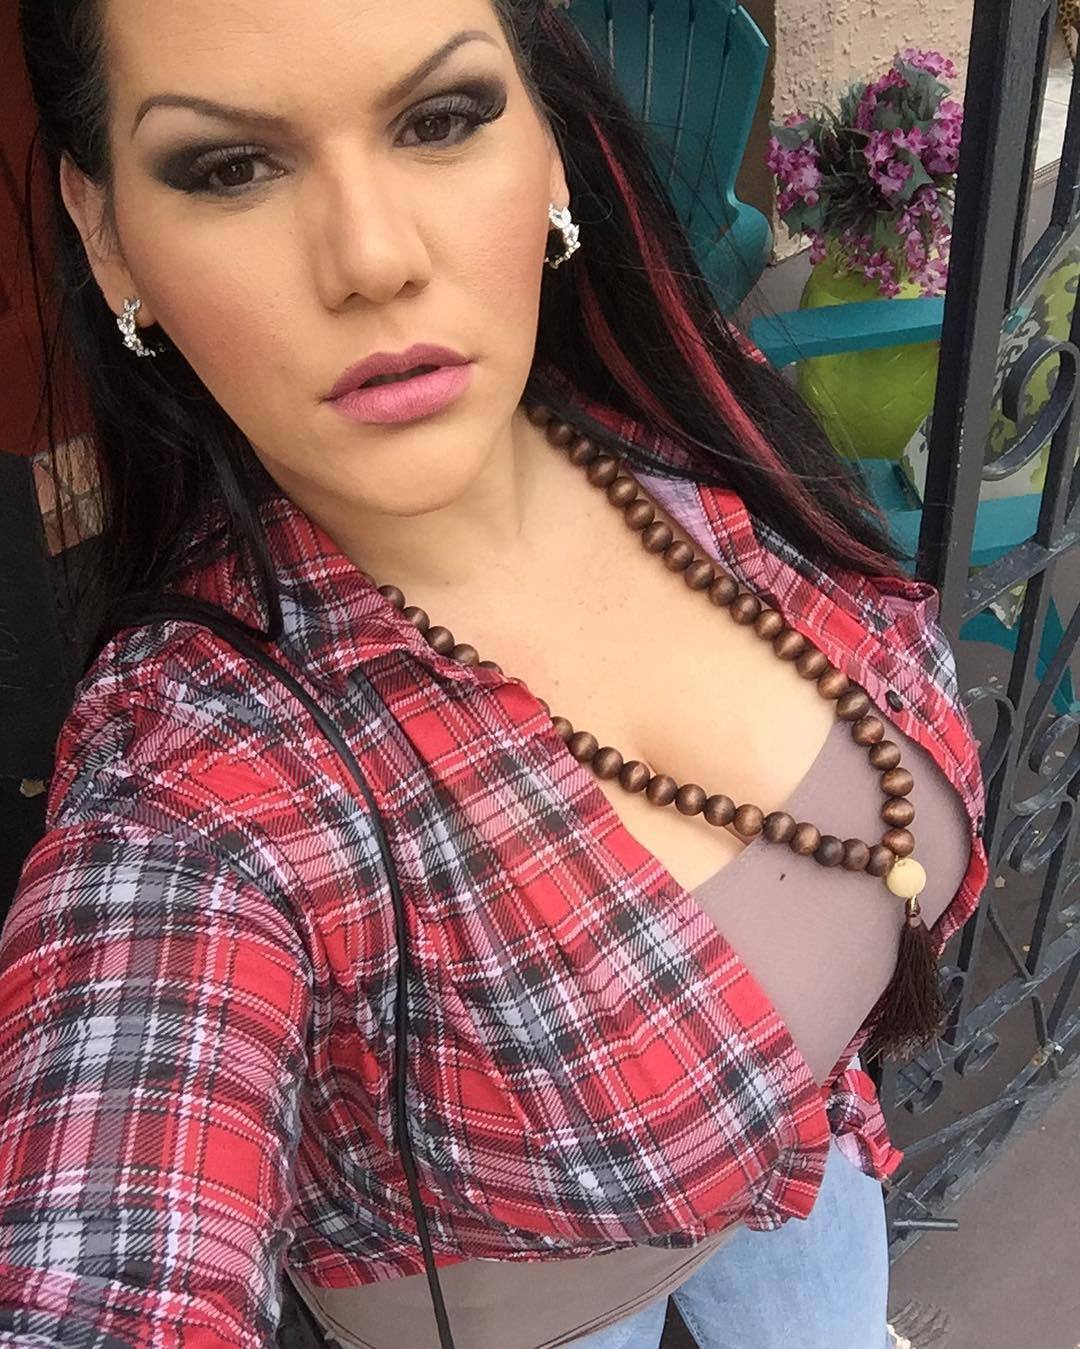 Red hot up n here&hellip;. #angelinacastrolive #angelinacastro #latina #bbw #boobs